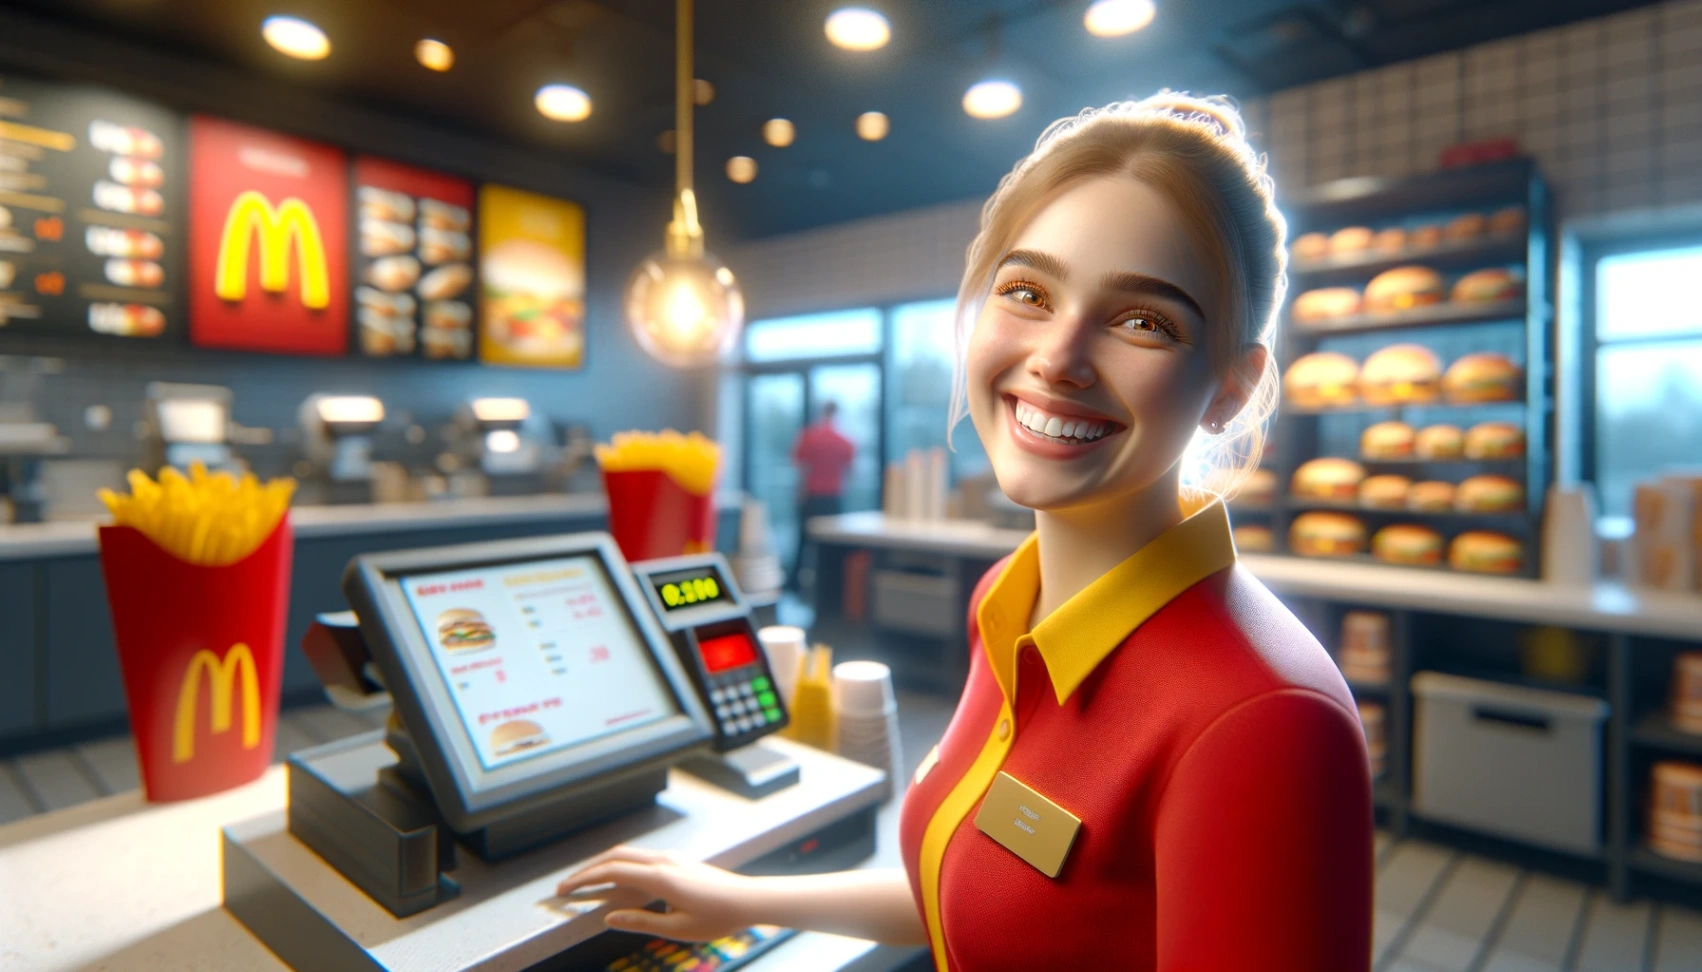 Jobs at McDonald's: Learn How to Easily Apply Online